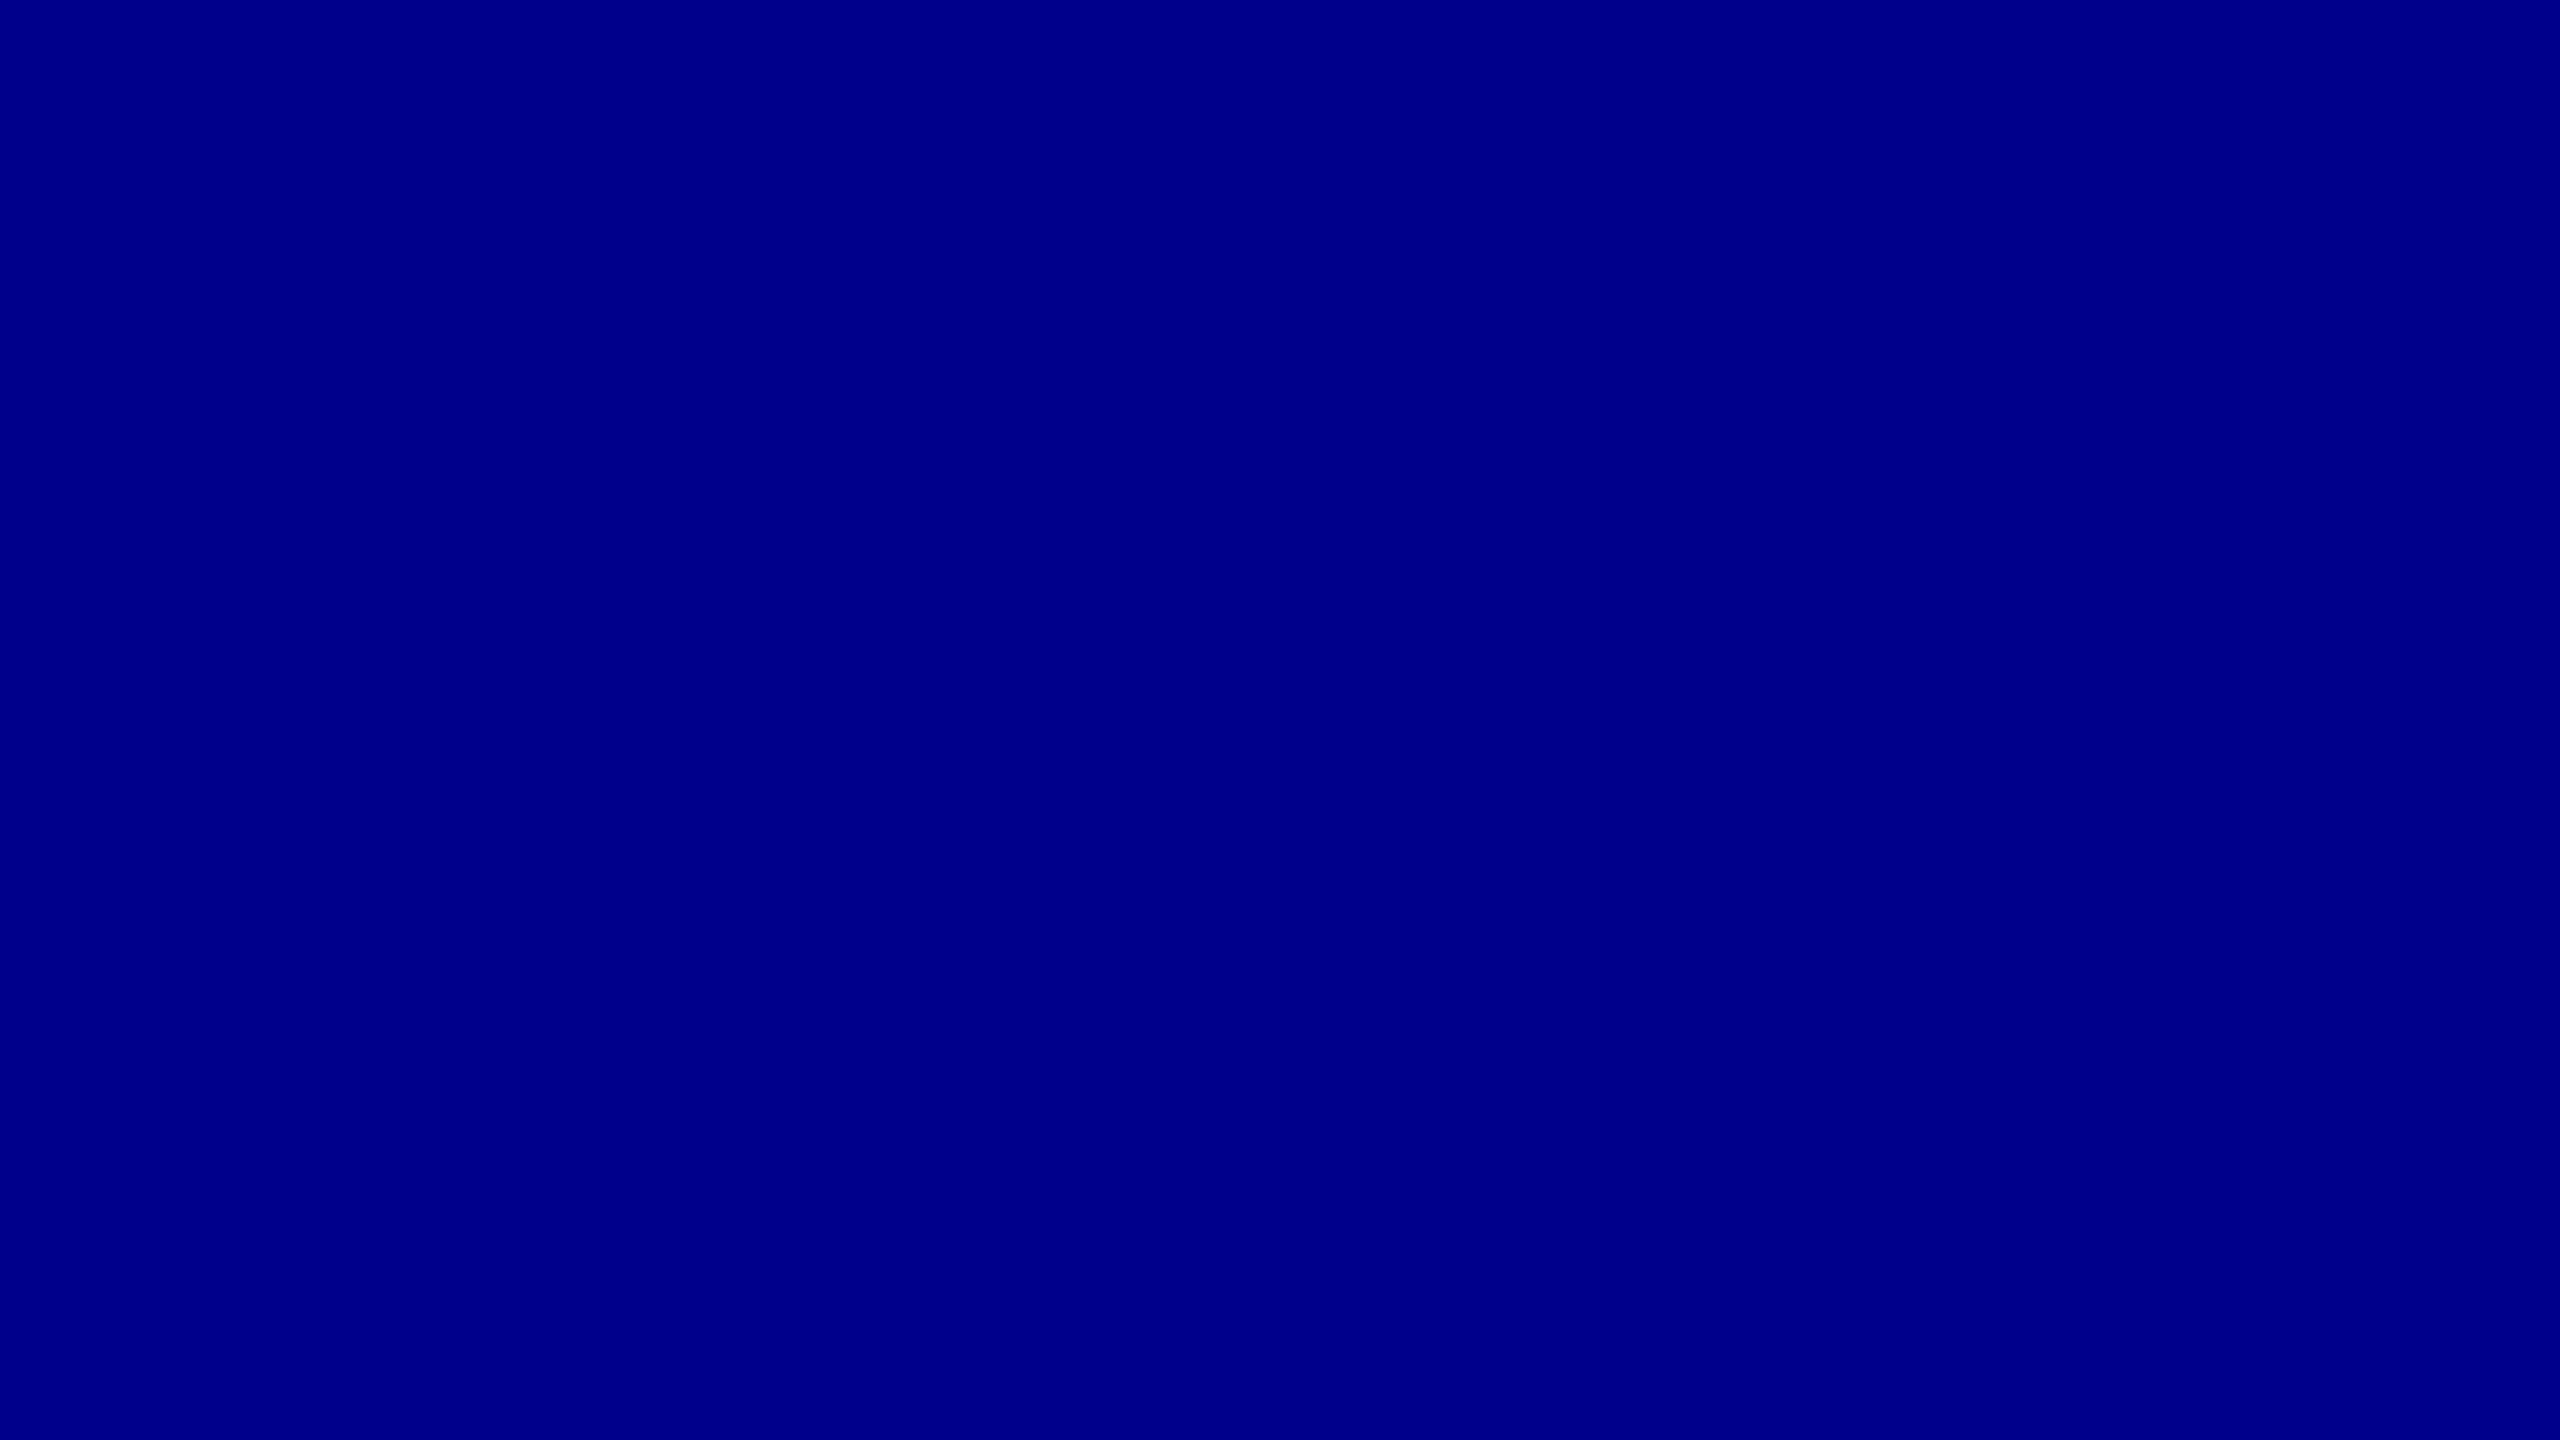 Dark Solid Blue Background HD Wallpaper Pictures